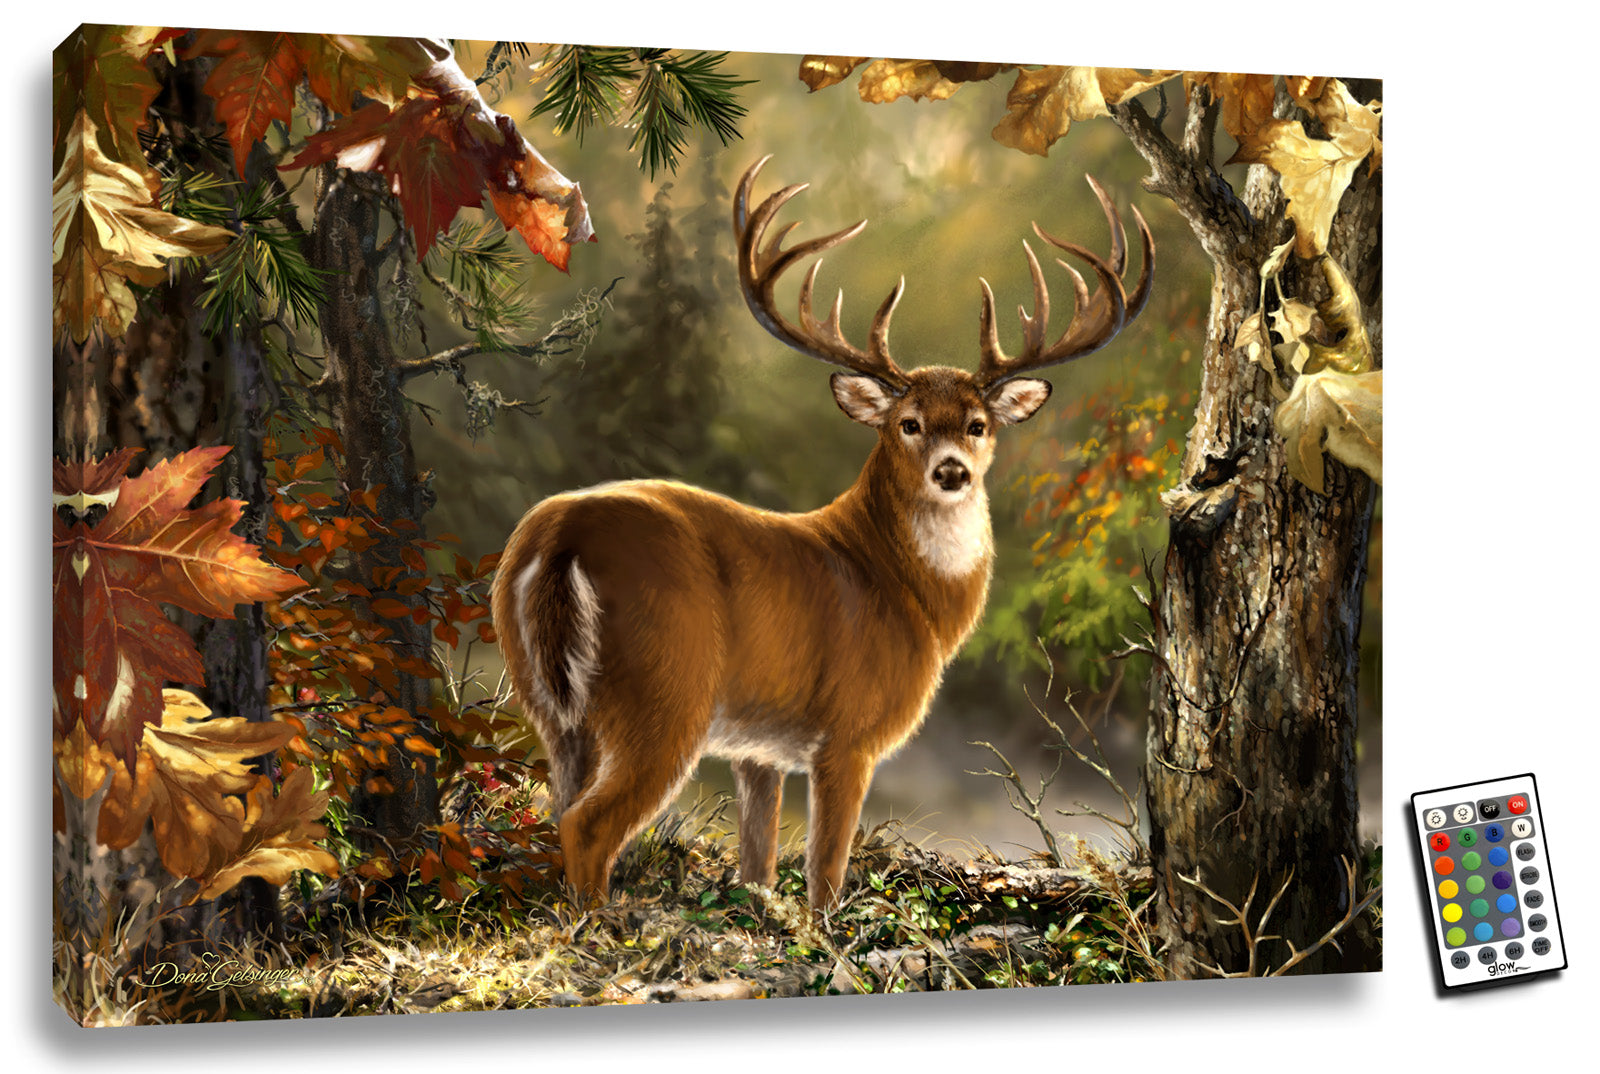 This stunning piece captures the essence of the majestic whitetail buck, as it stands strong and proud amidst the beauty of the forest.